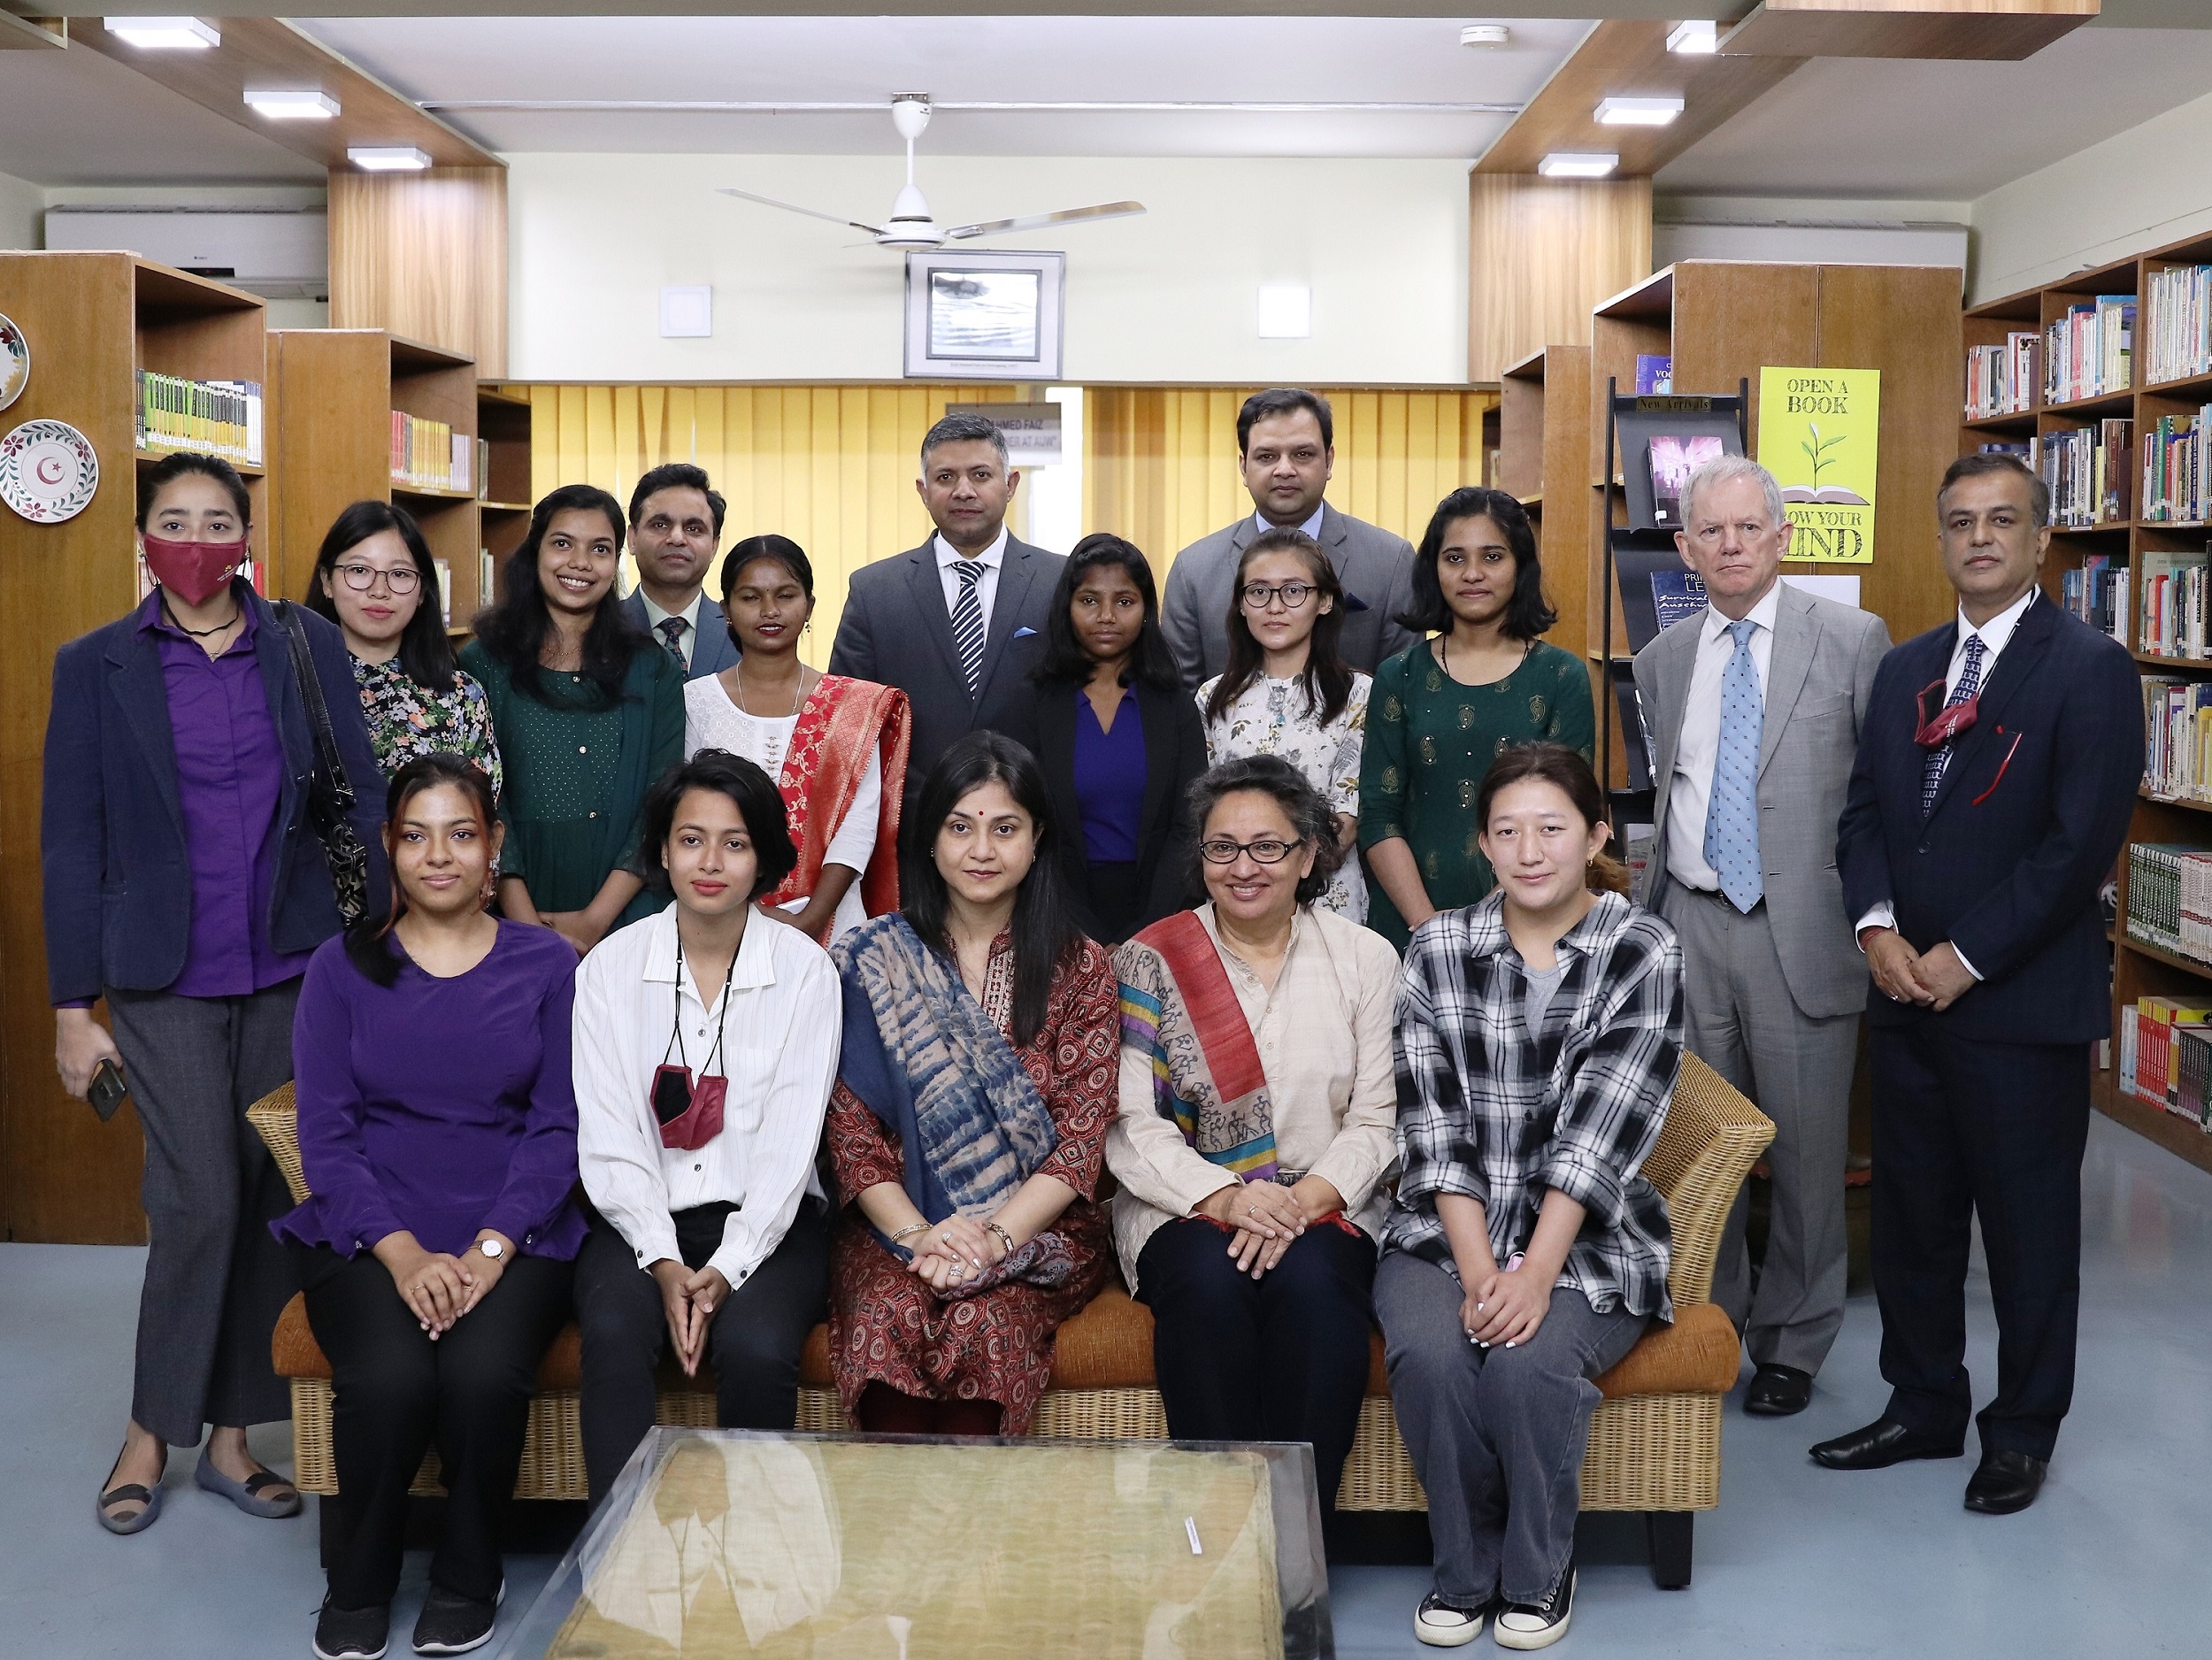 His Excellency High Commissioner Vikram Doraiswami and Mrs. Doraiswani with AUW students at the AUW Library.